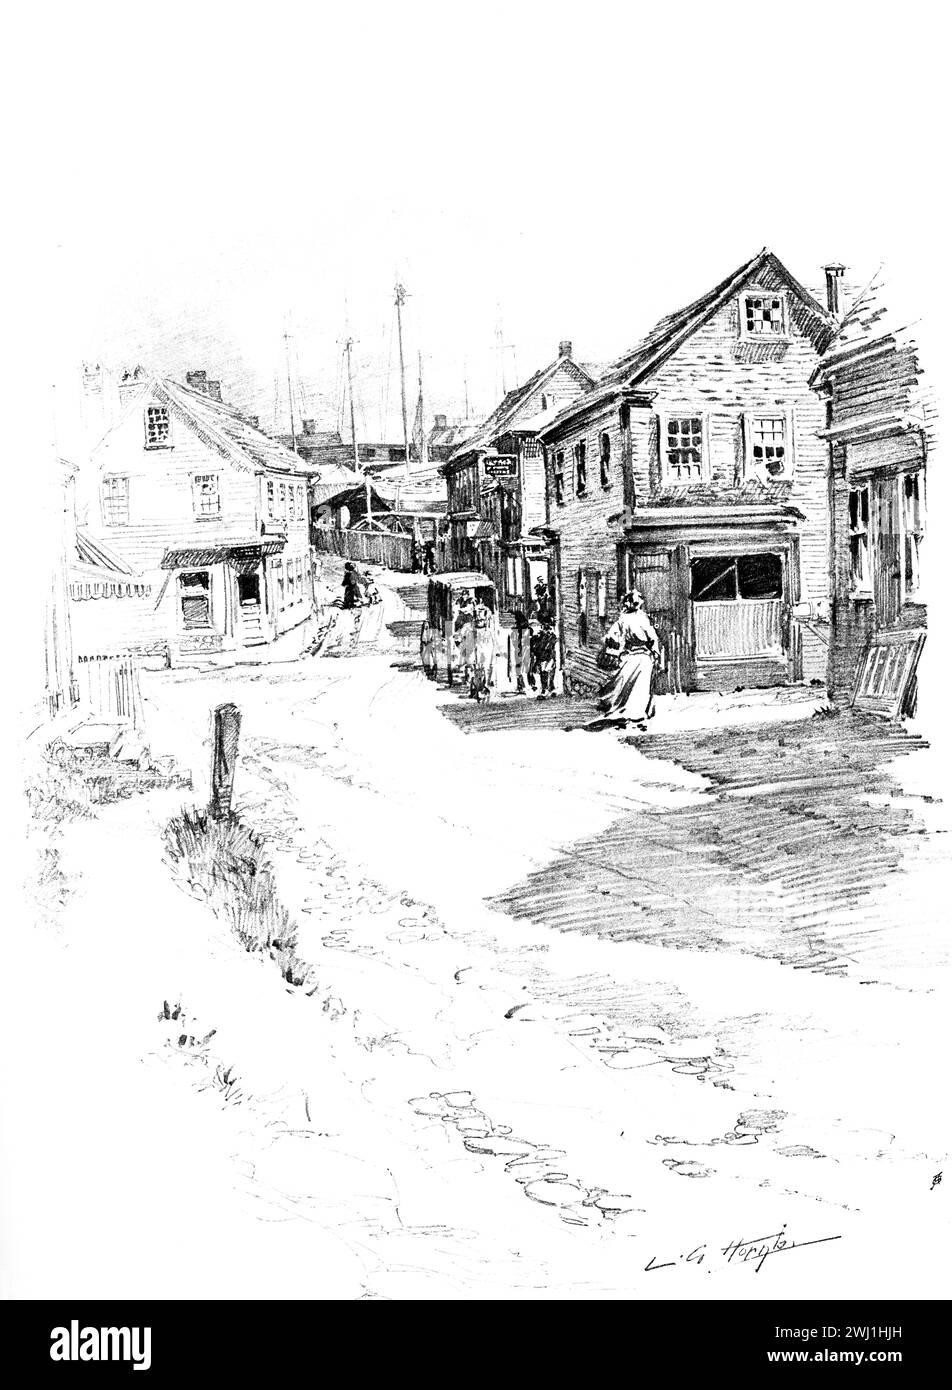 Marblehead Massachusetts, pencil illustration by early 20th century American artist; Lester G. Hornby Stock Photo